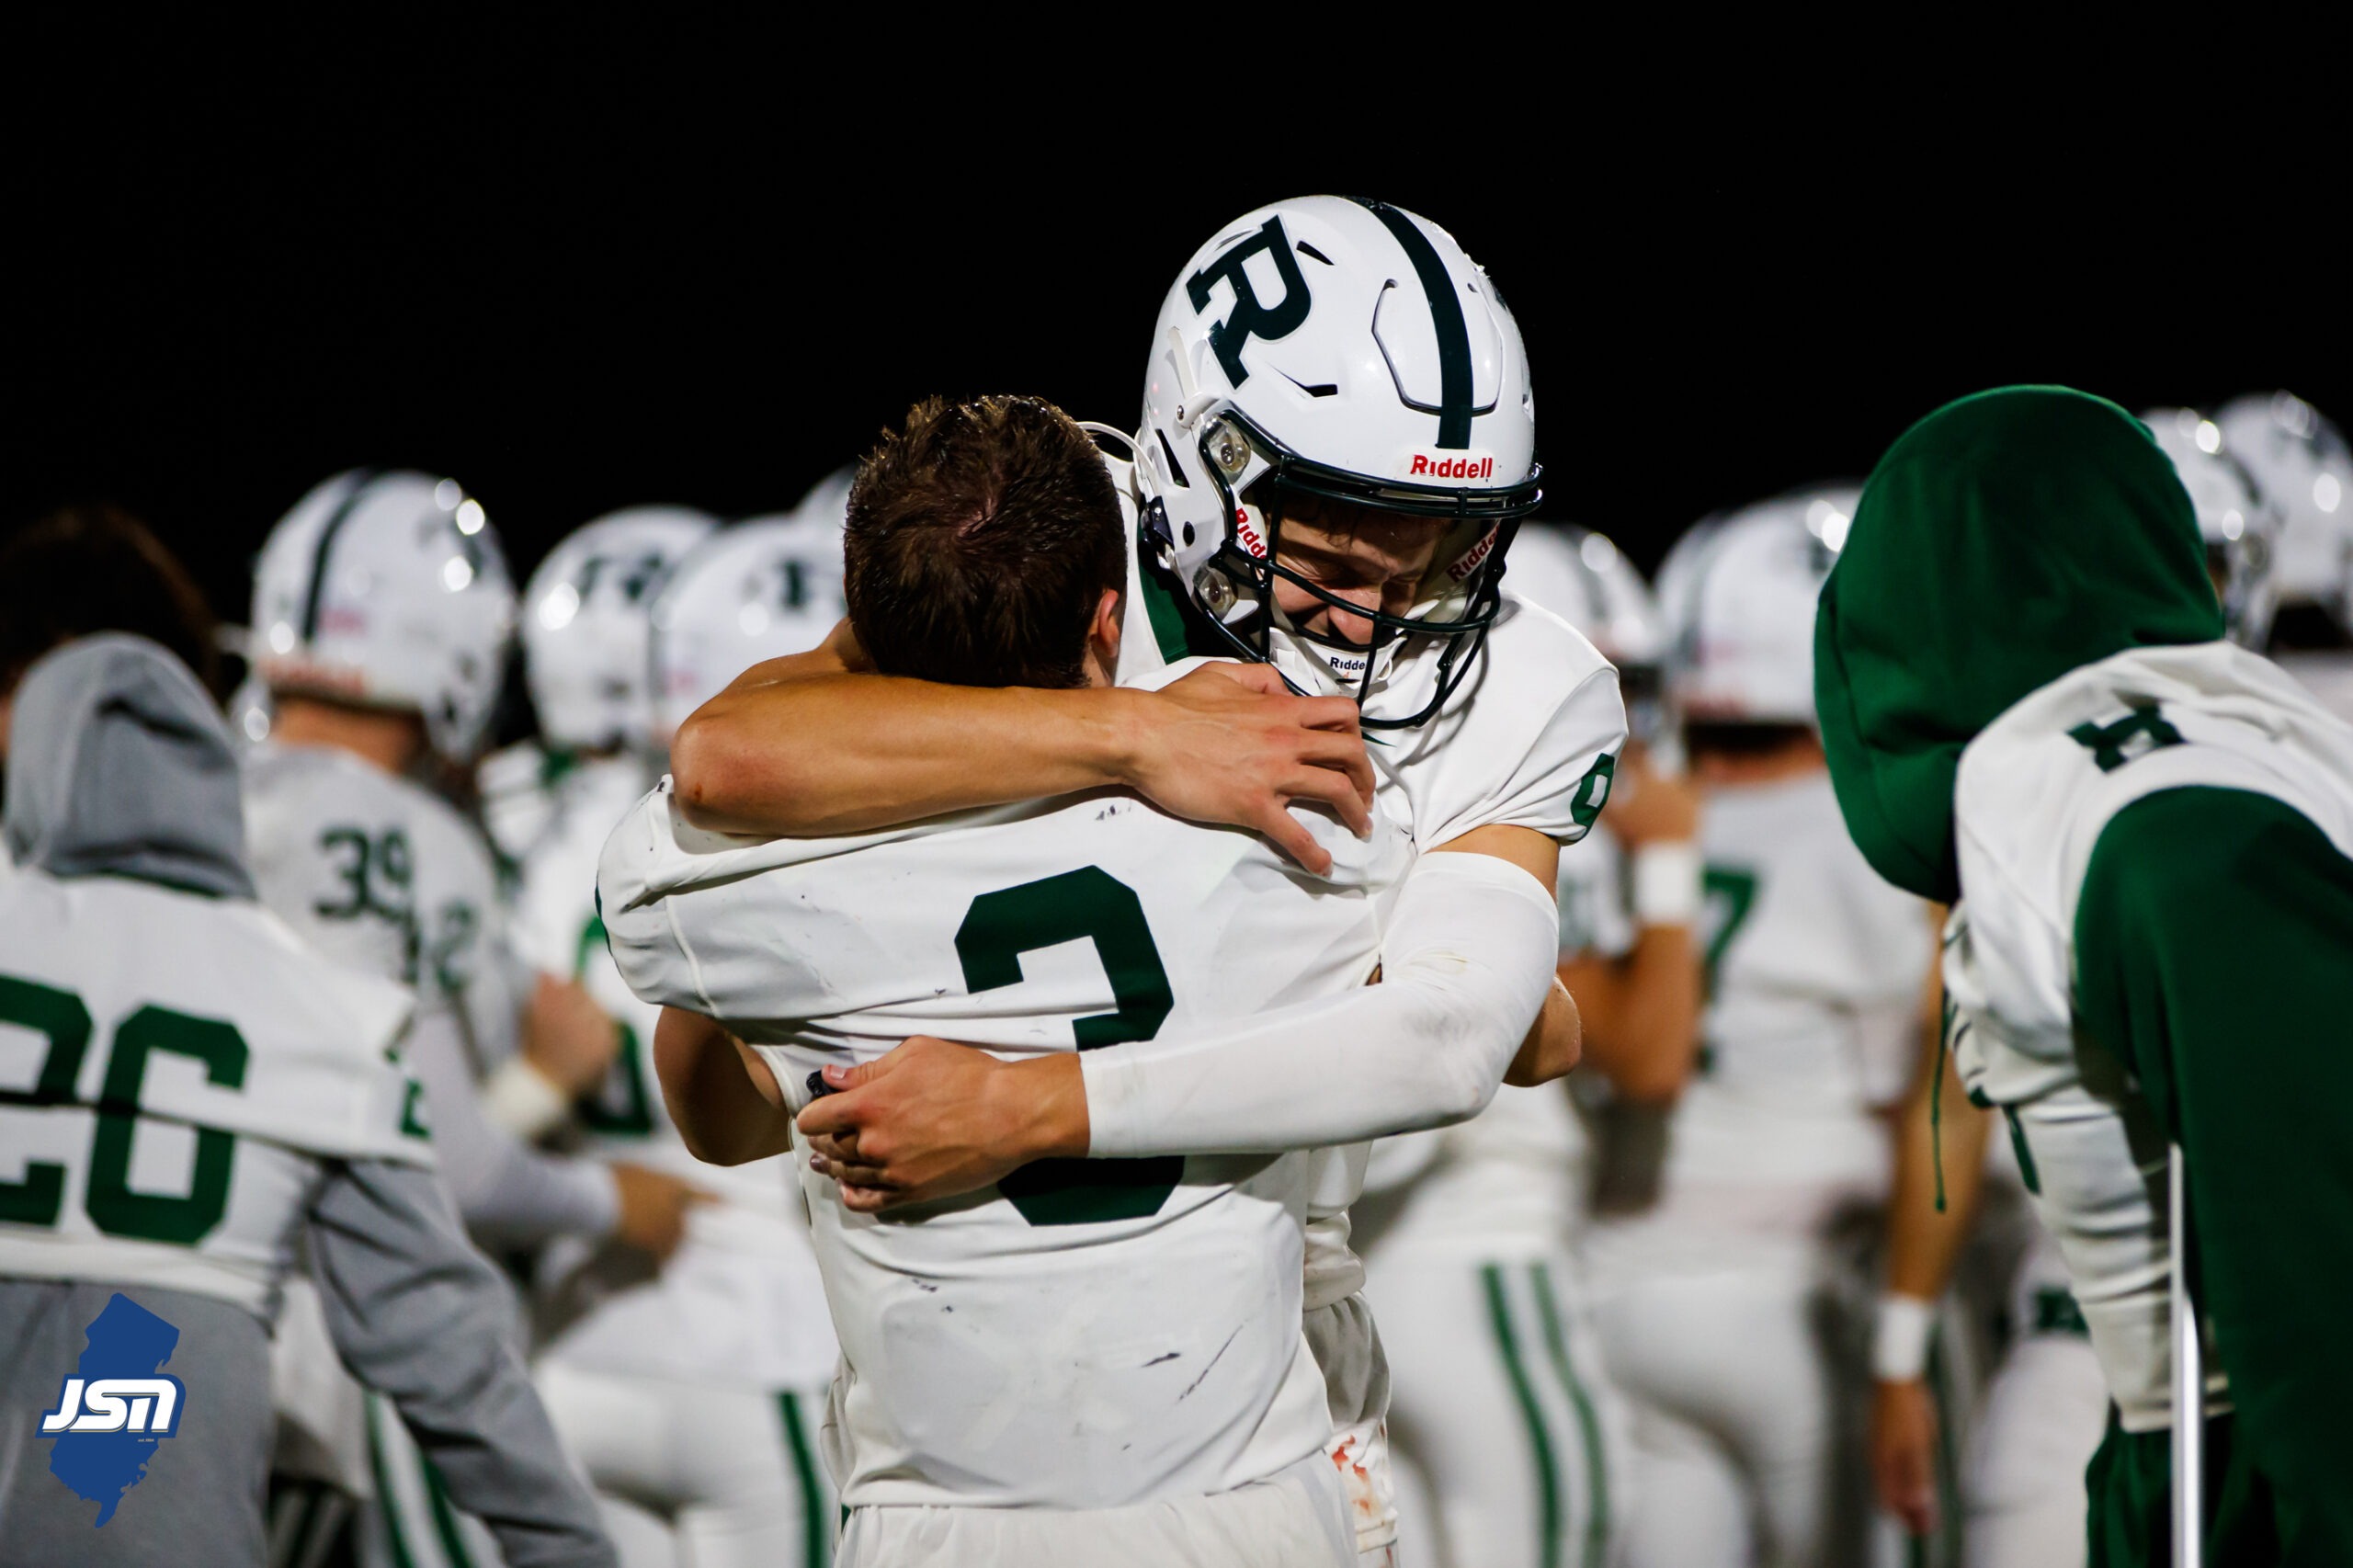 Ramapo football celebrates after their win over Northern Highlands